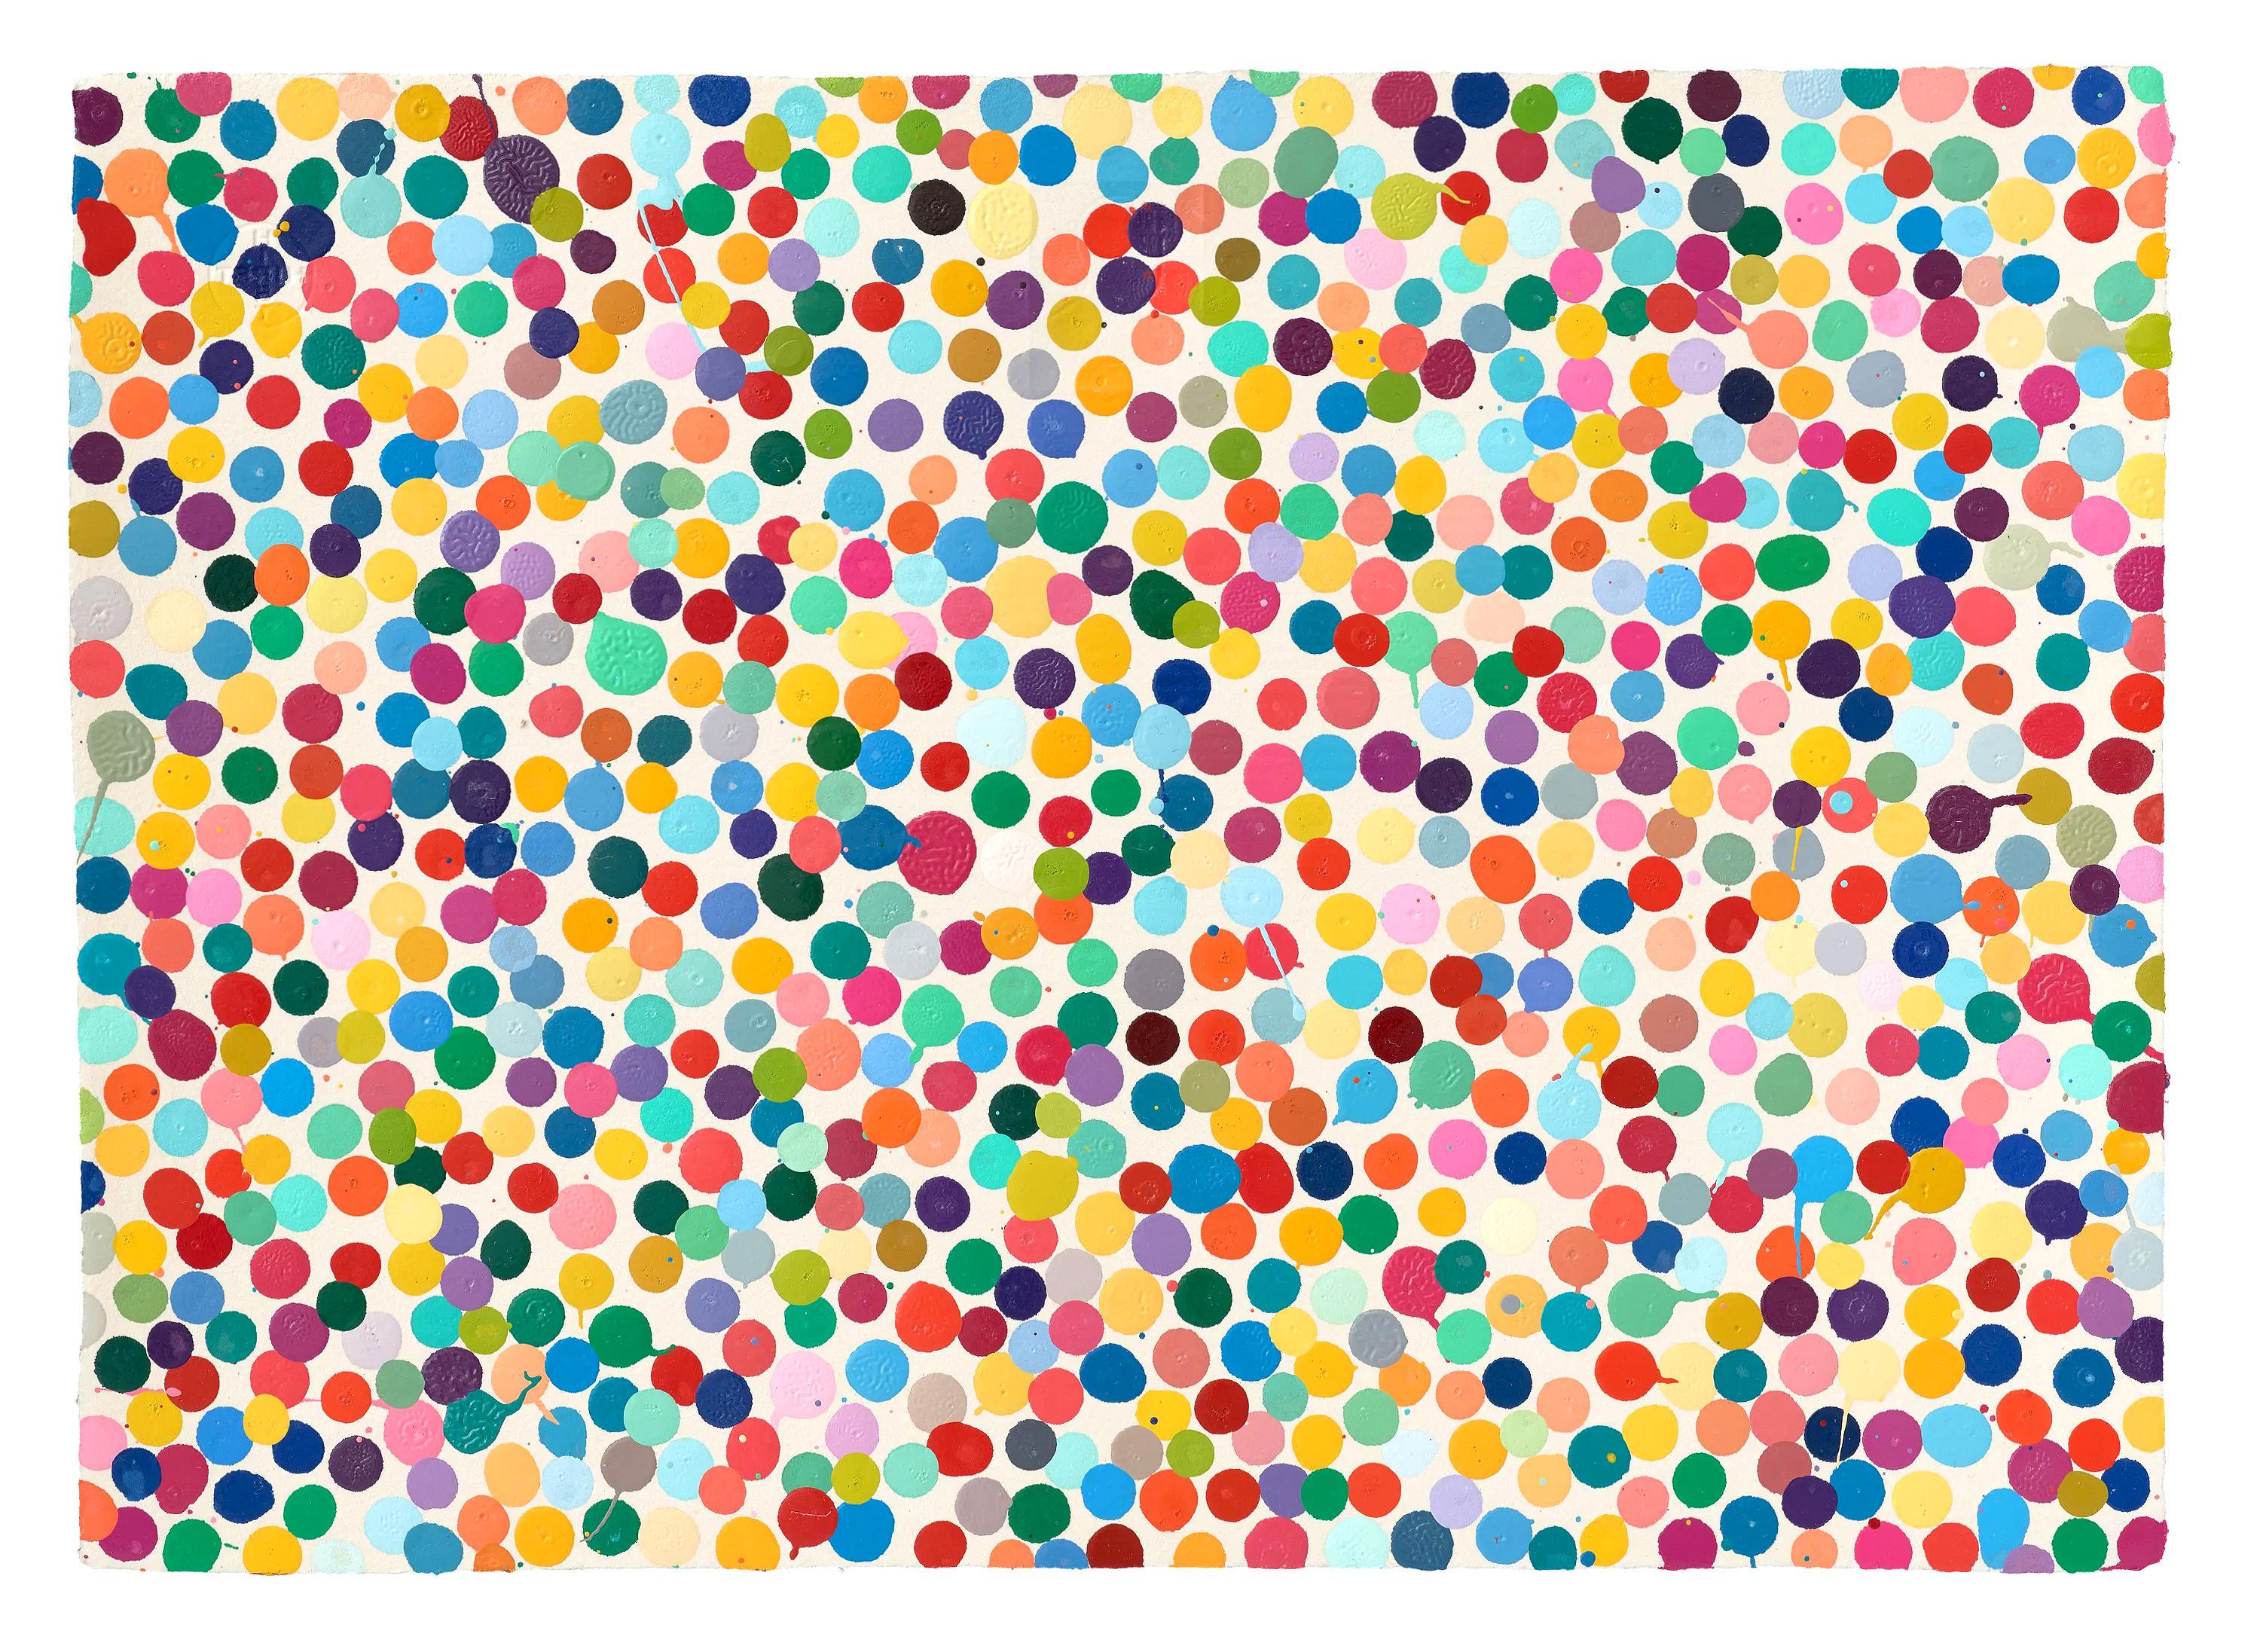 DAMIEN HIRST - THE CURRENCY. Original work The Currency Project. Dots. Colors